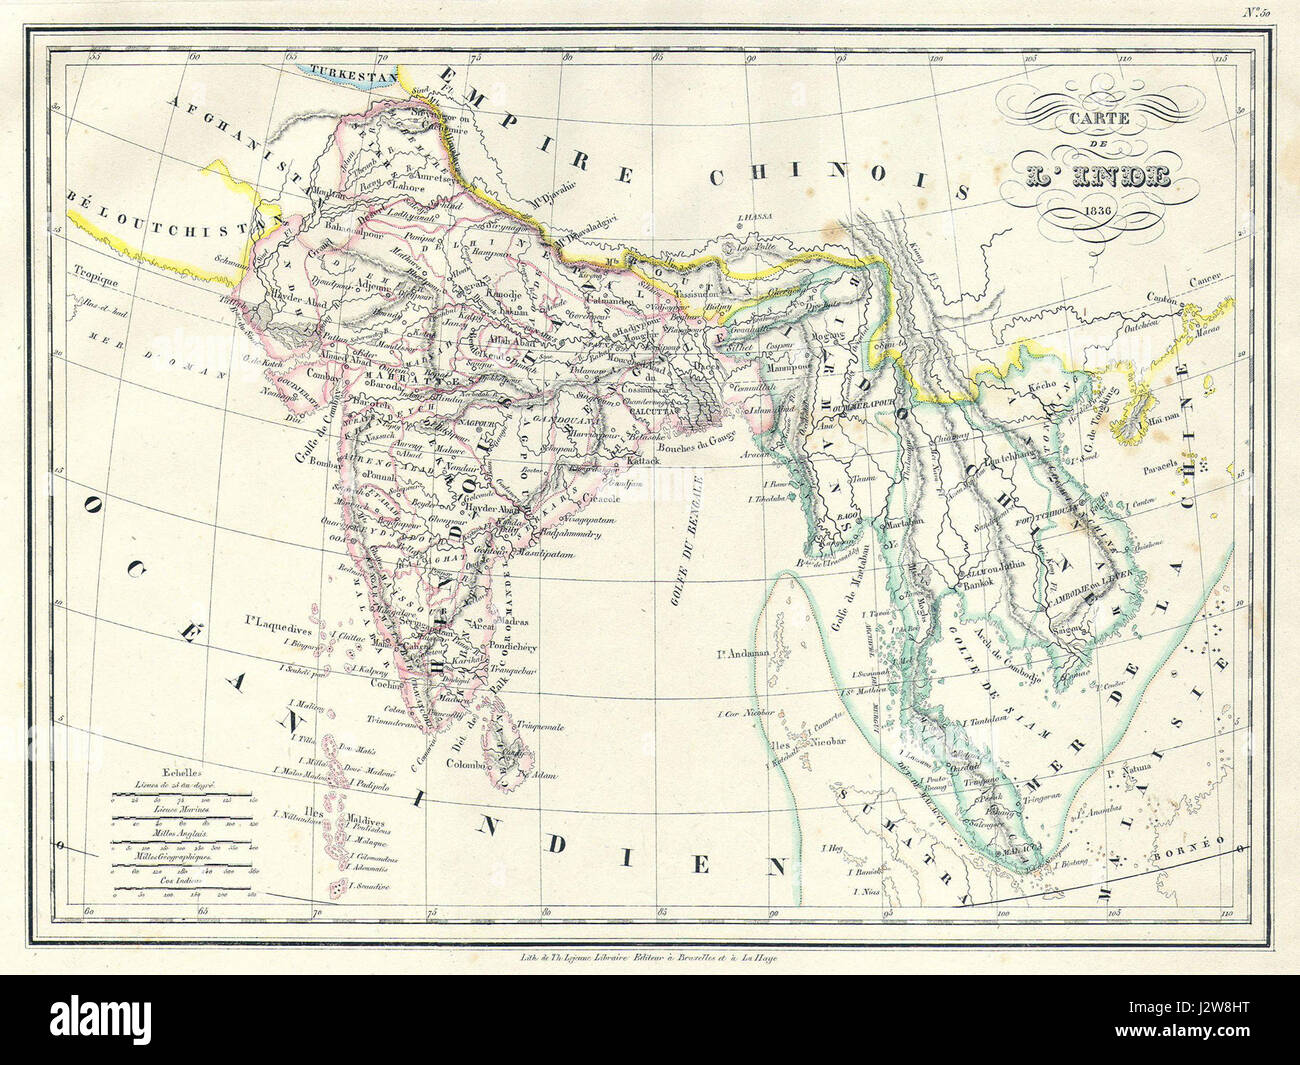 1837 Malte-Brun Map of India, Burma and Southeast Asia (Siam , Vietnam ) - Geographicus - India-mb-1837 Stock Photo